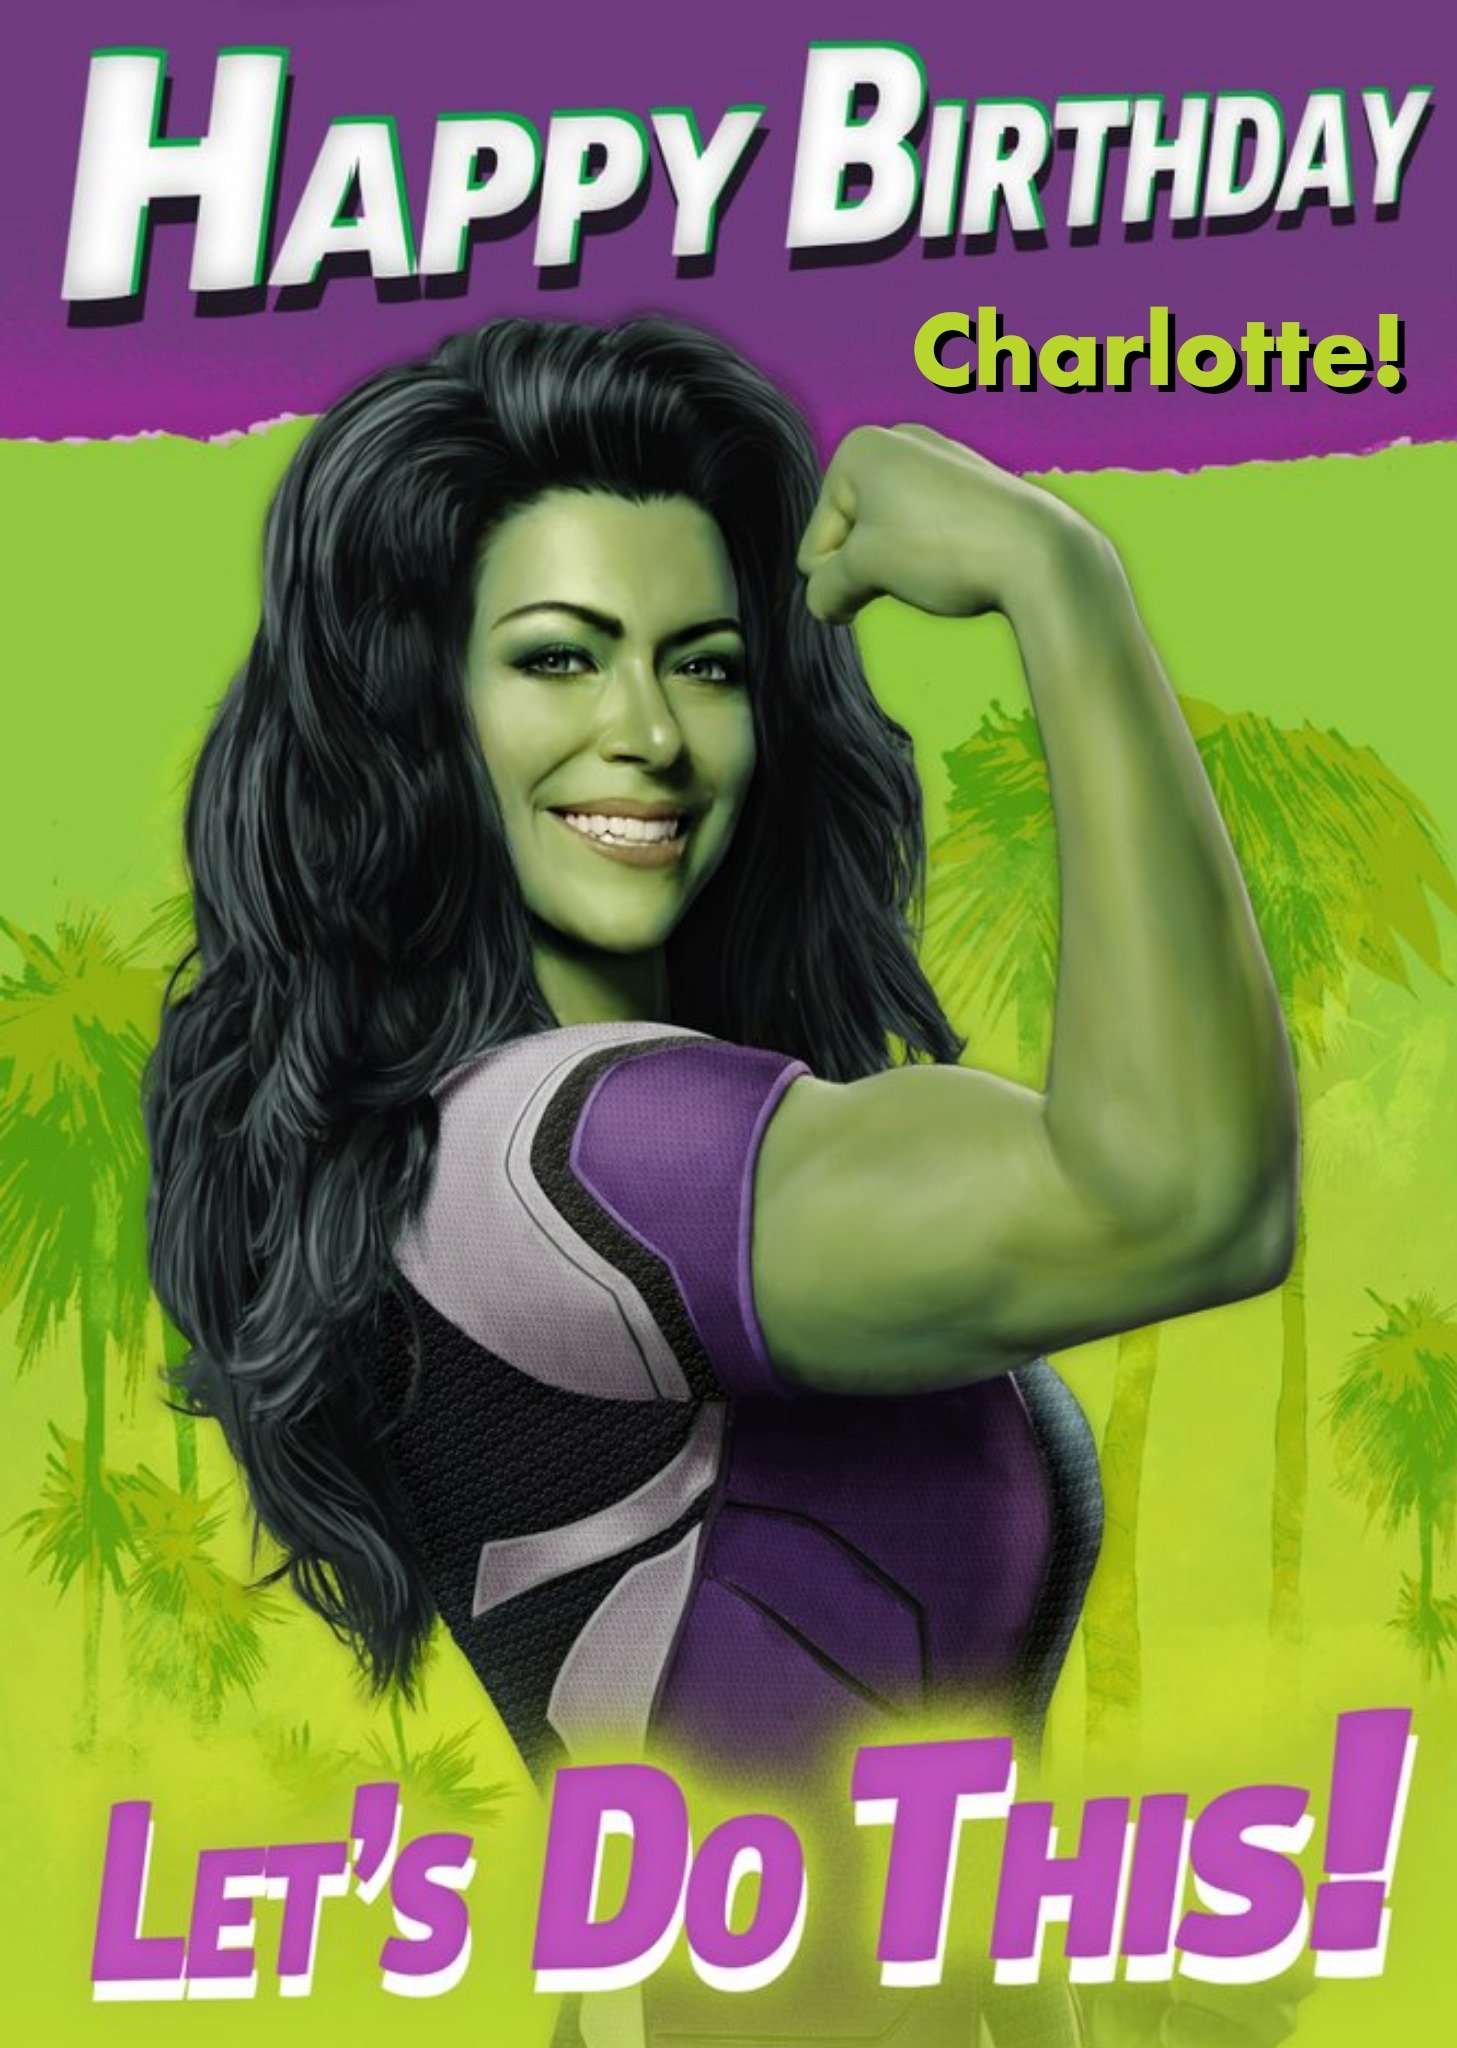 Marvel Illustration Of She Hulk On A Green Background With Palm Trees She Hulk Birthday Card, Large